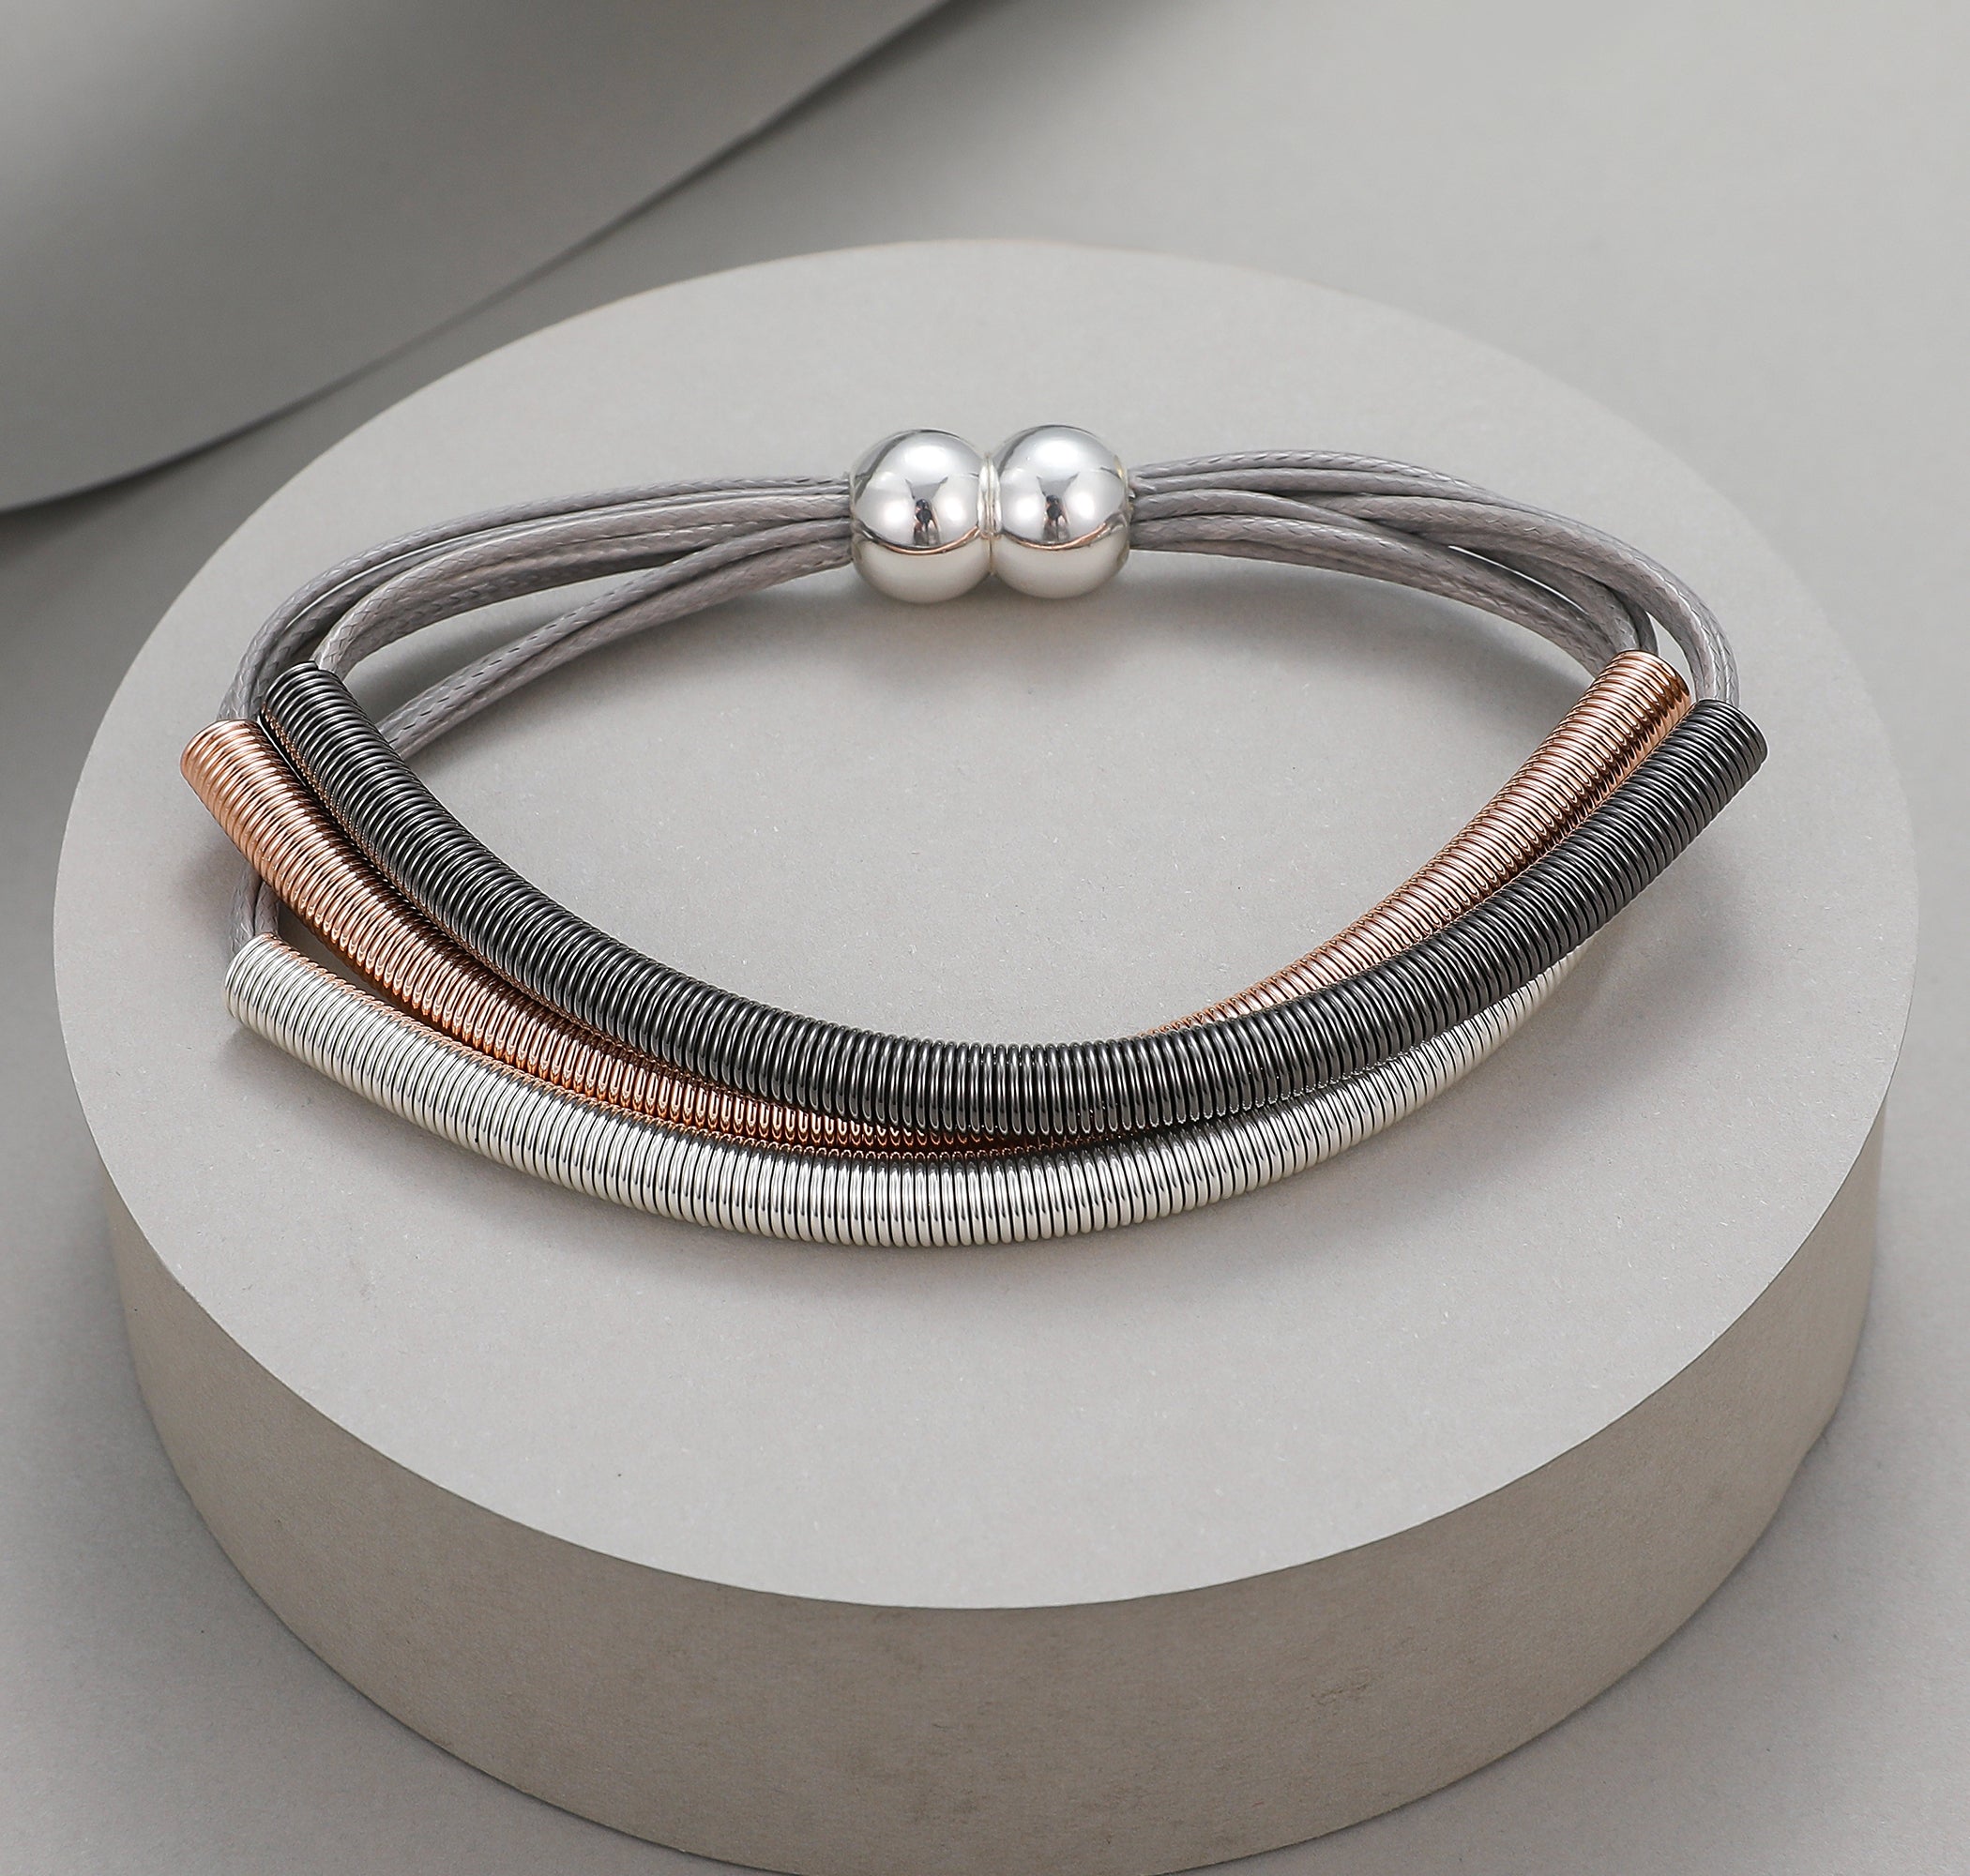 Magnetic bracelet with rose gold, silver and pewter flexible coiled wire